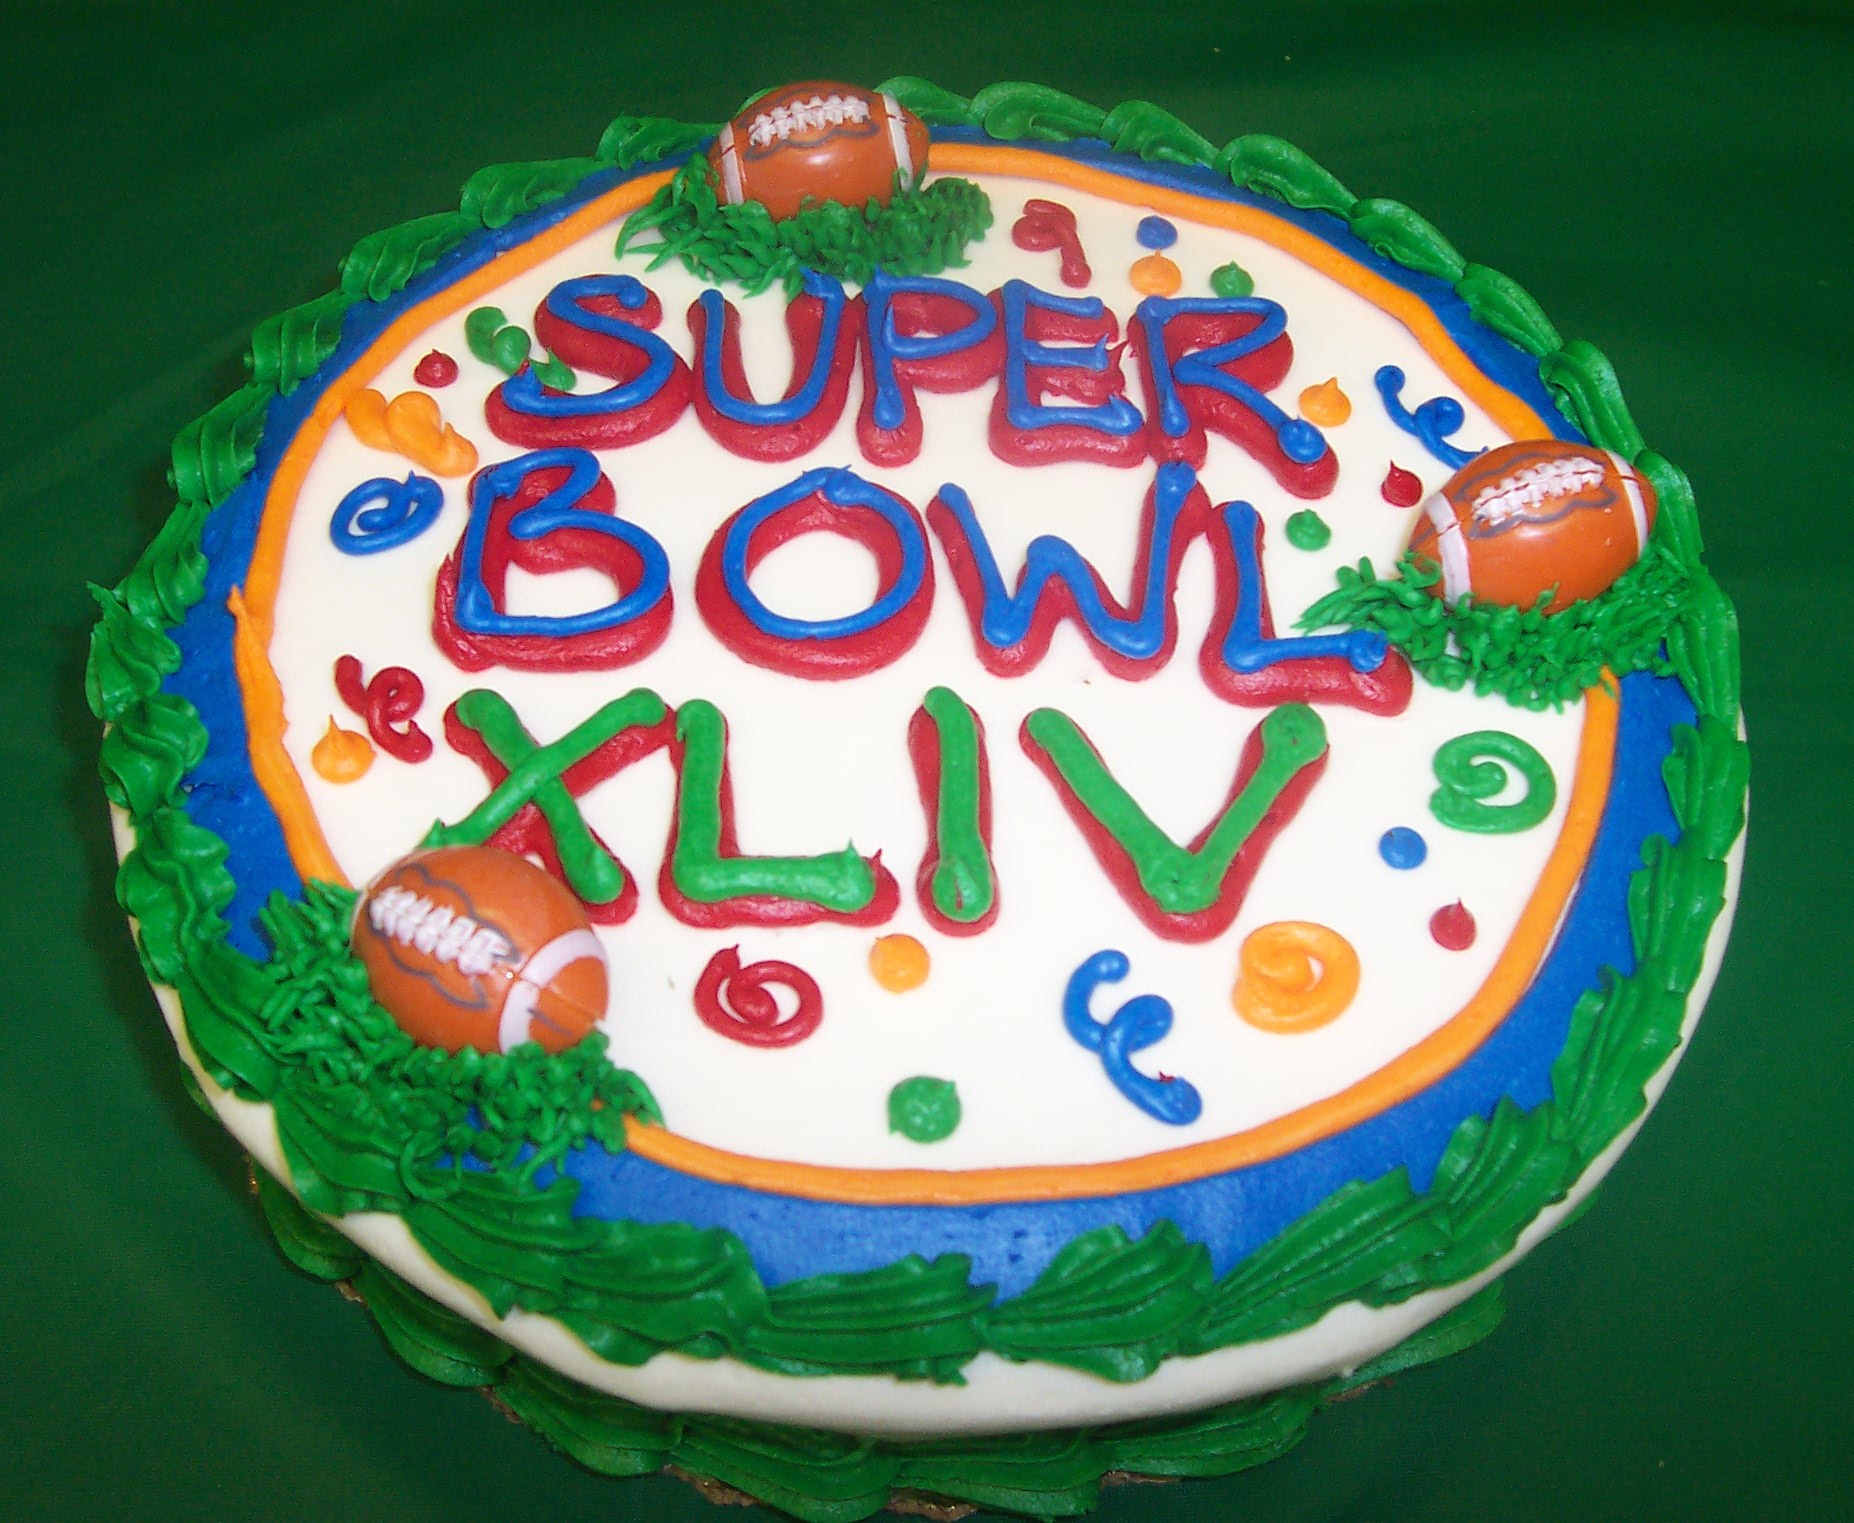 Super Bowl Cake Ashley's Pastry Shop in Dayton, OH